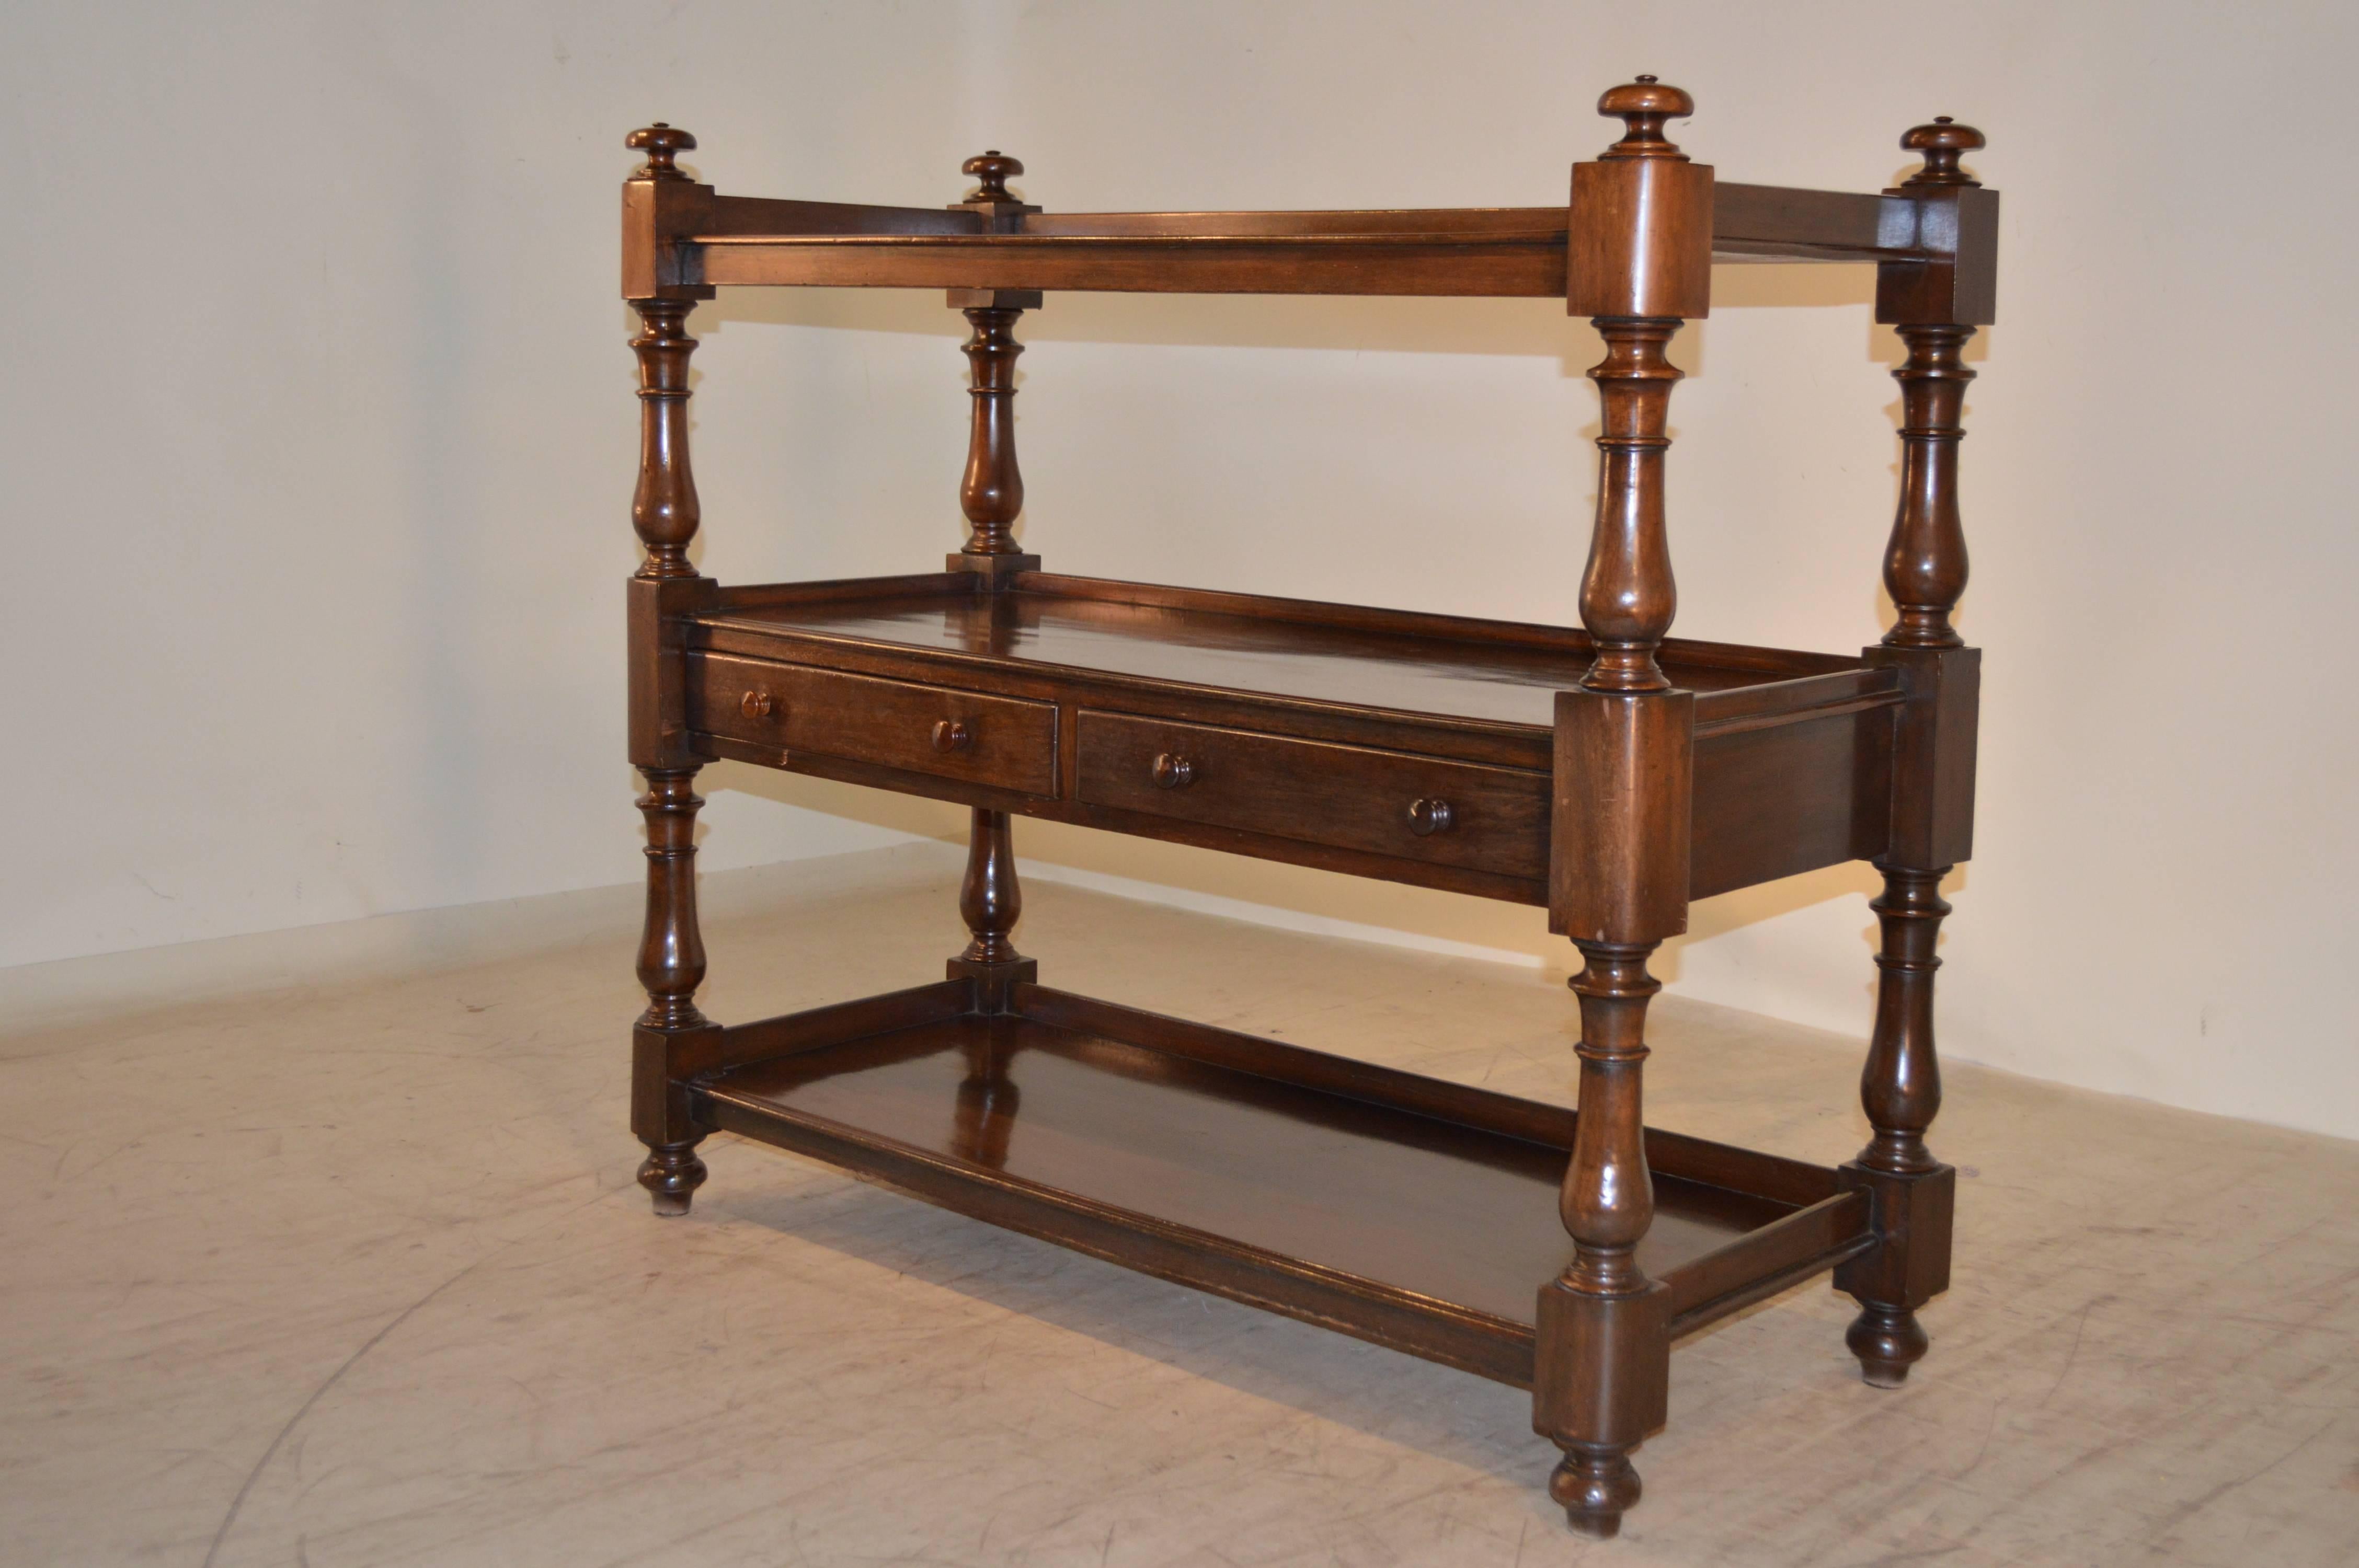 19th century English mahogany buffet with three shelves. The shelves have galleries and are supported on wonderfully turned legs and shelf supports. Age wear, staining on shelves.